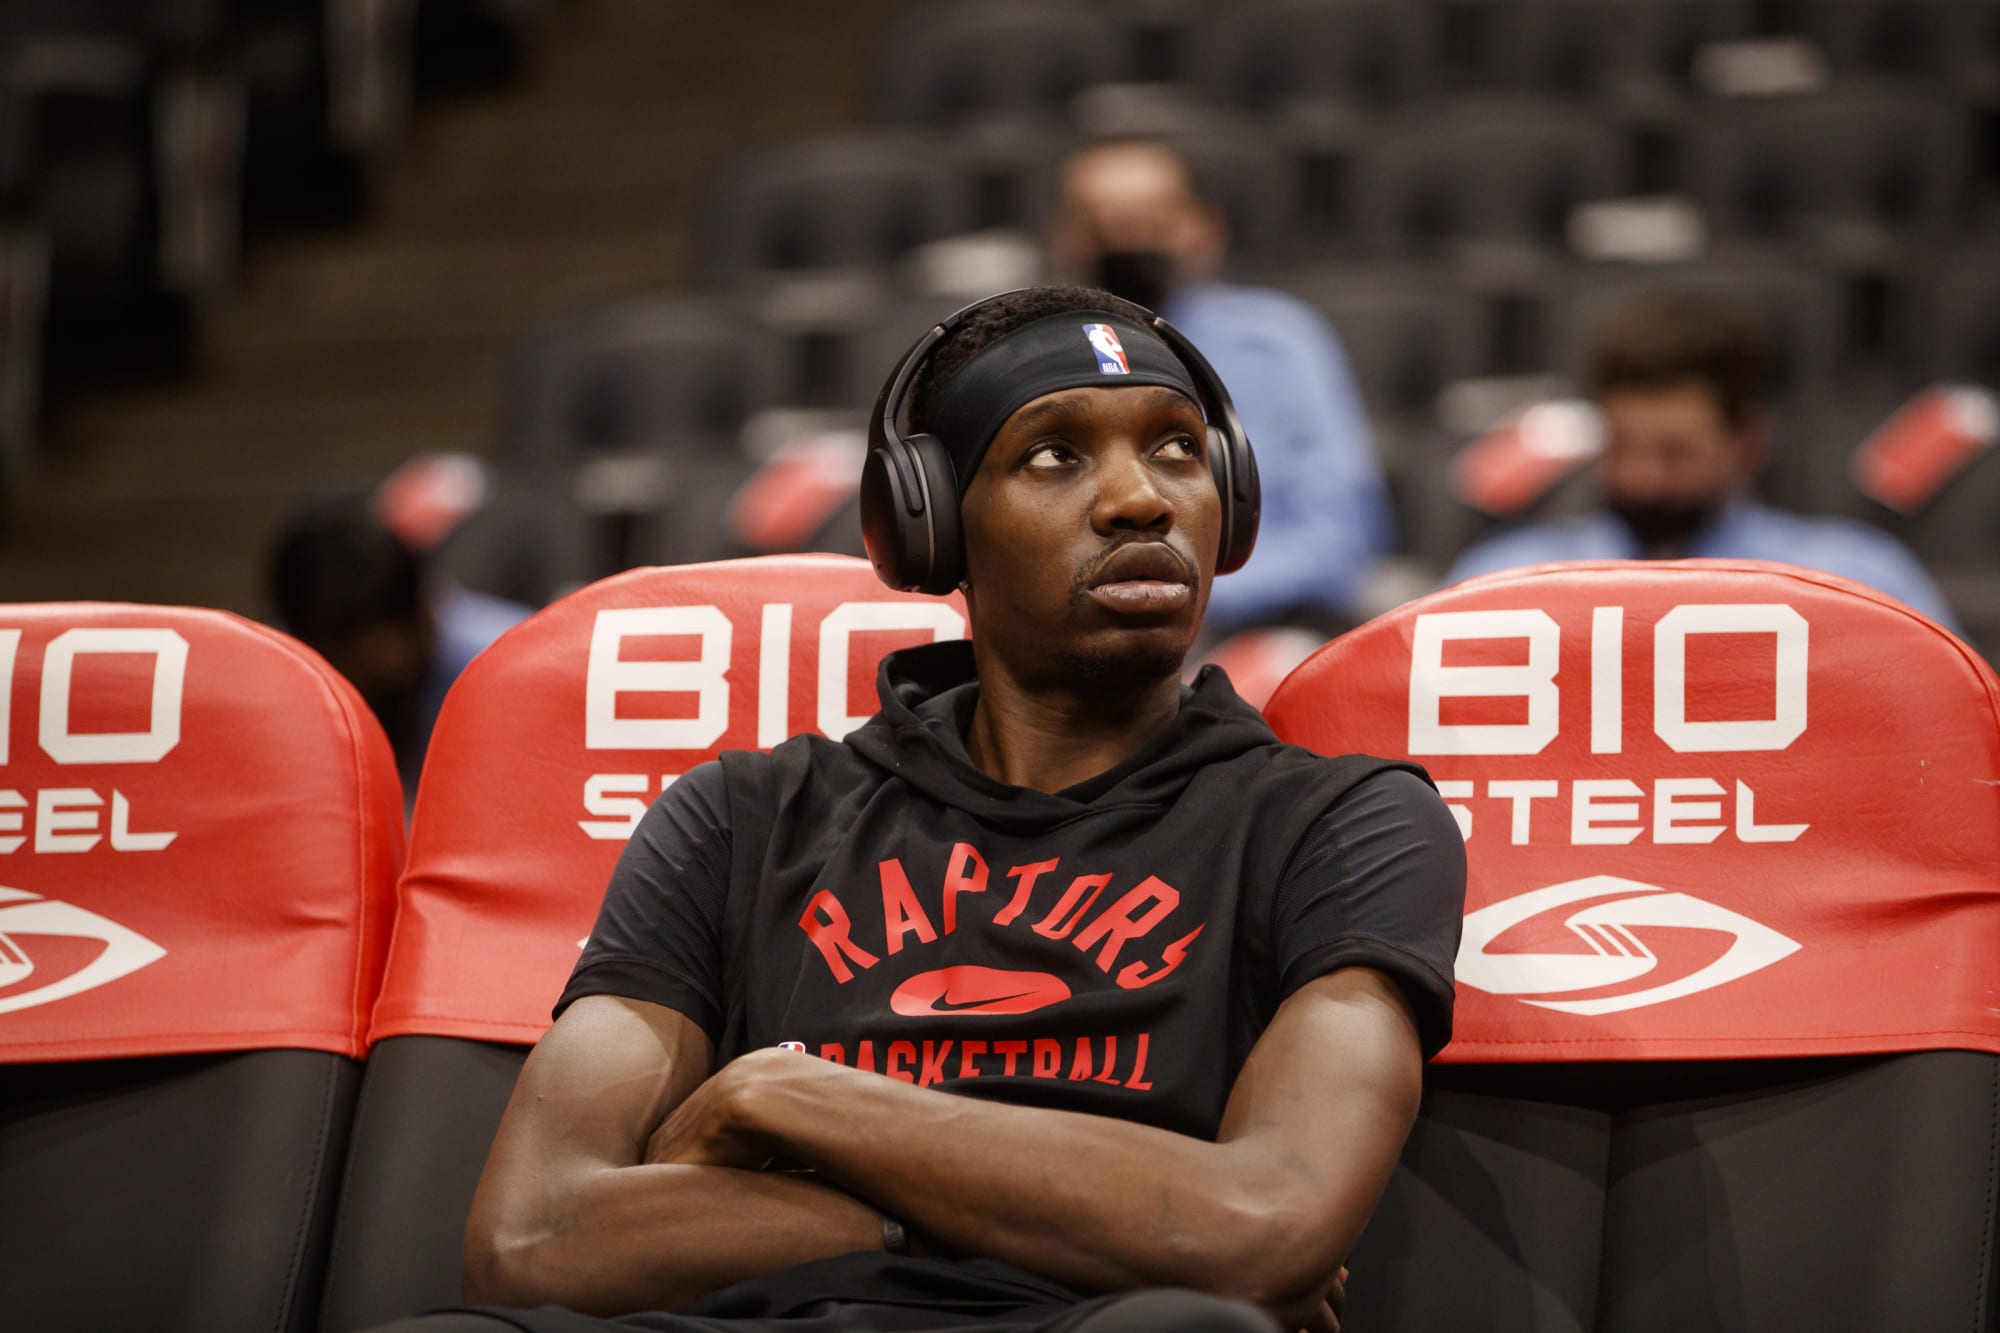 Could Chris Boucher see minutes cut in awful stretch for Raptors?